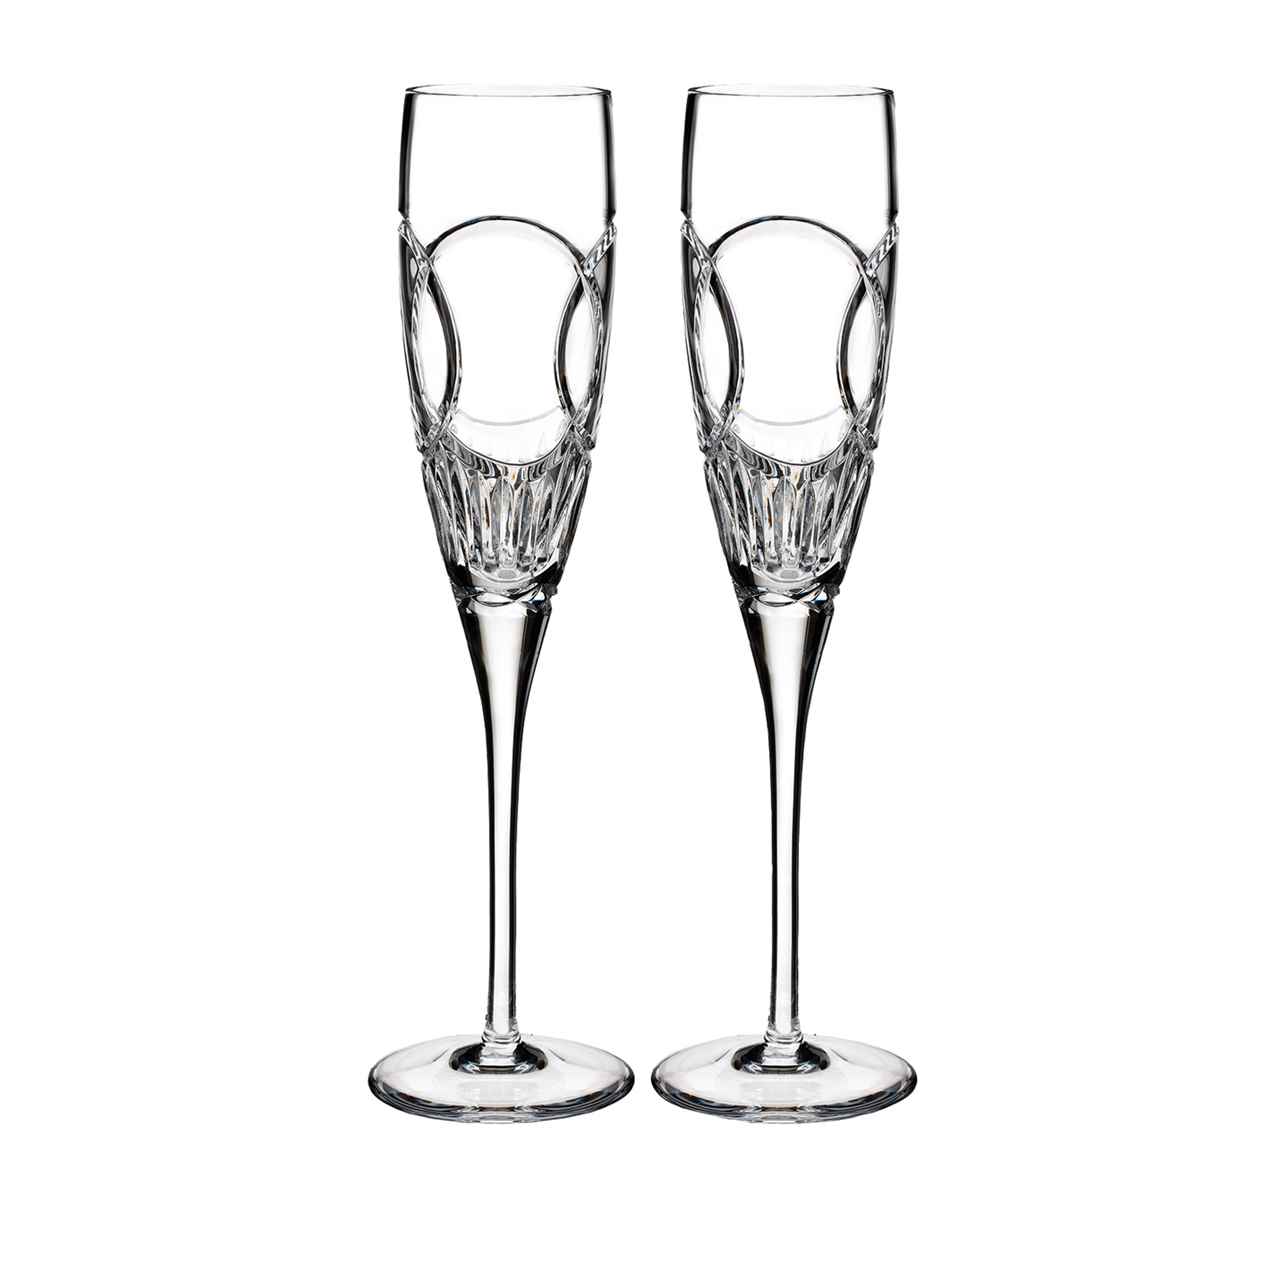  Waterford Love Wedding Vows Champagne Flute, Set of 2 